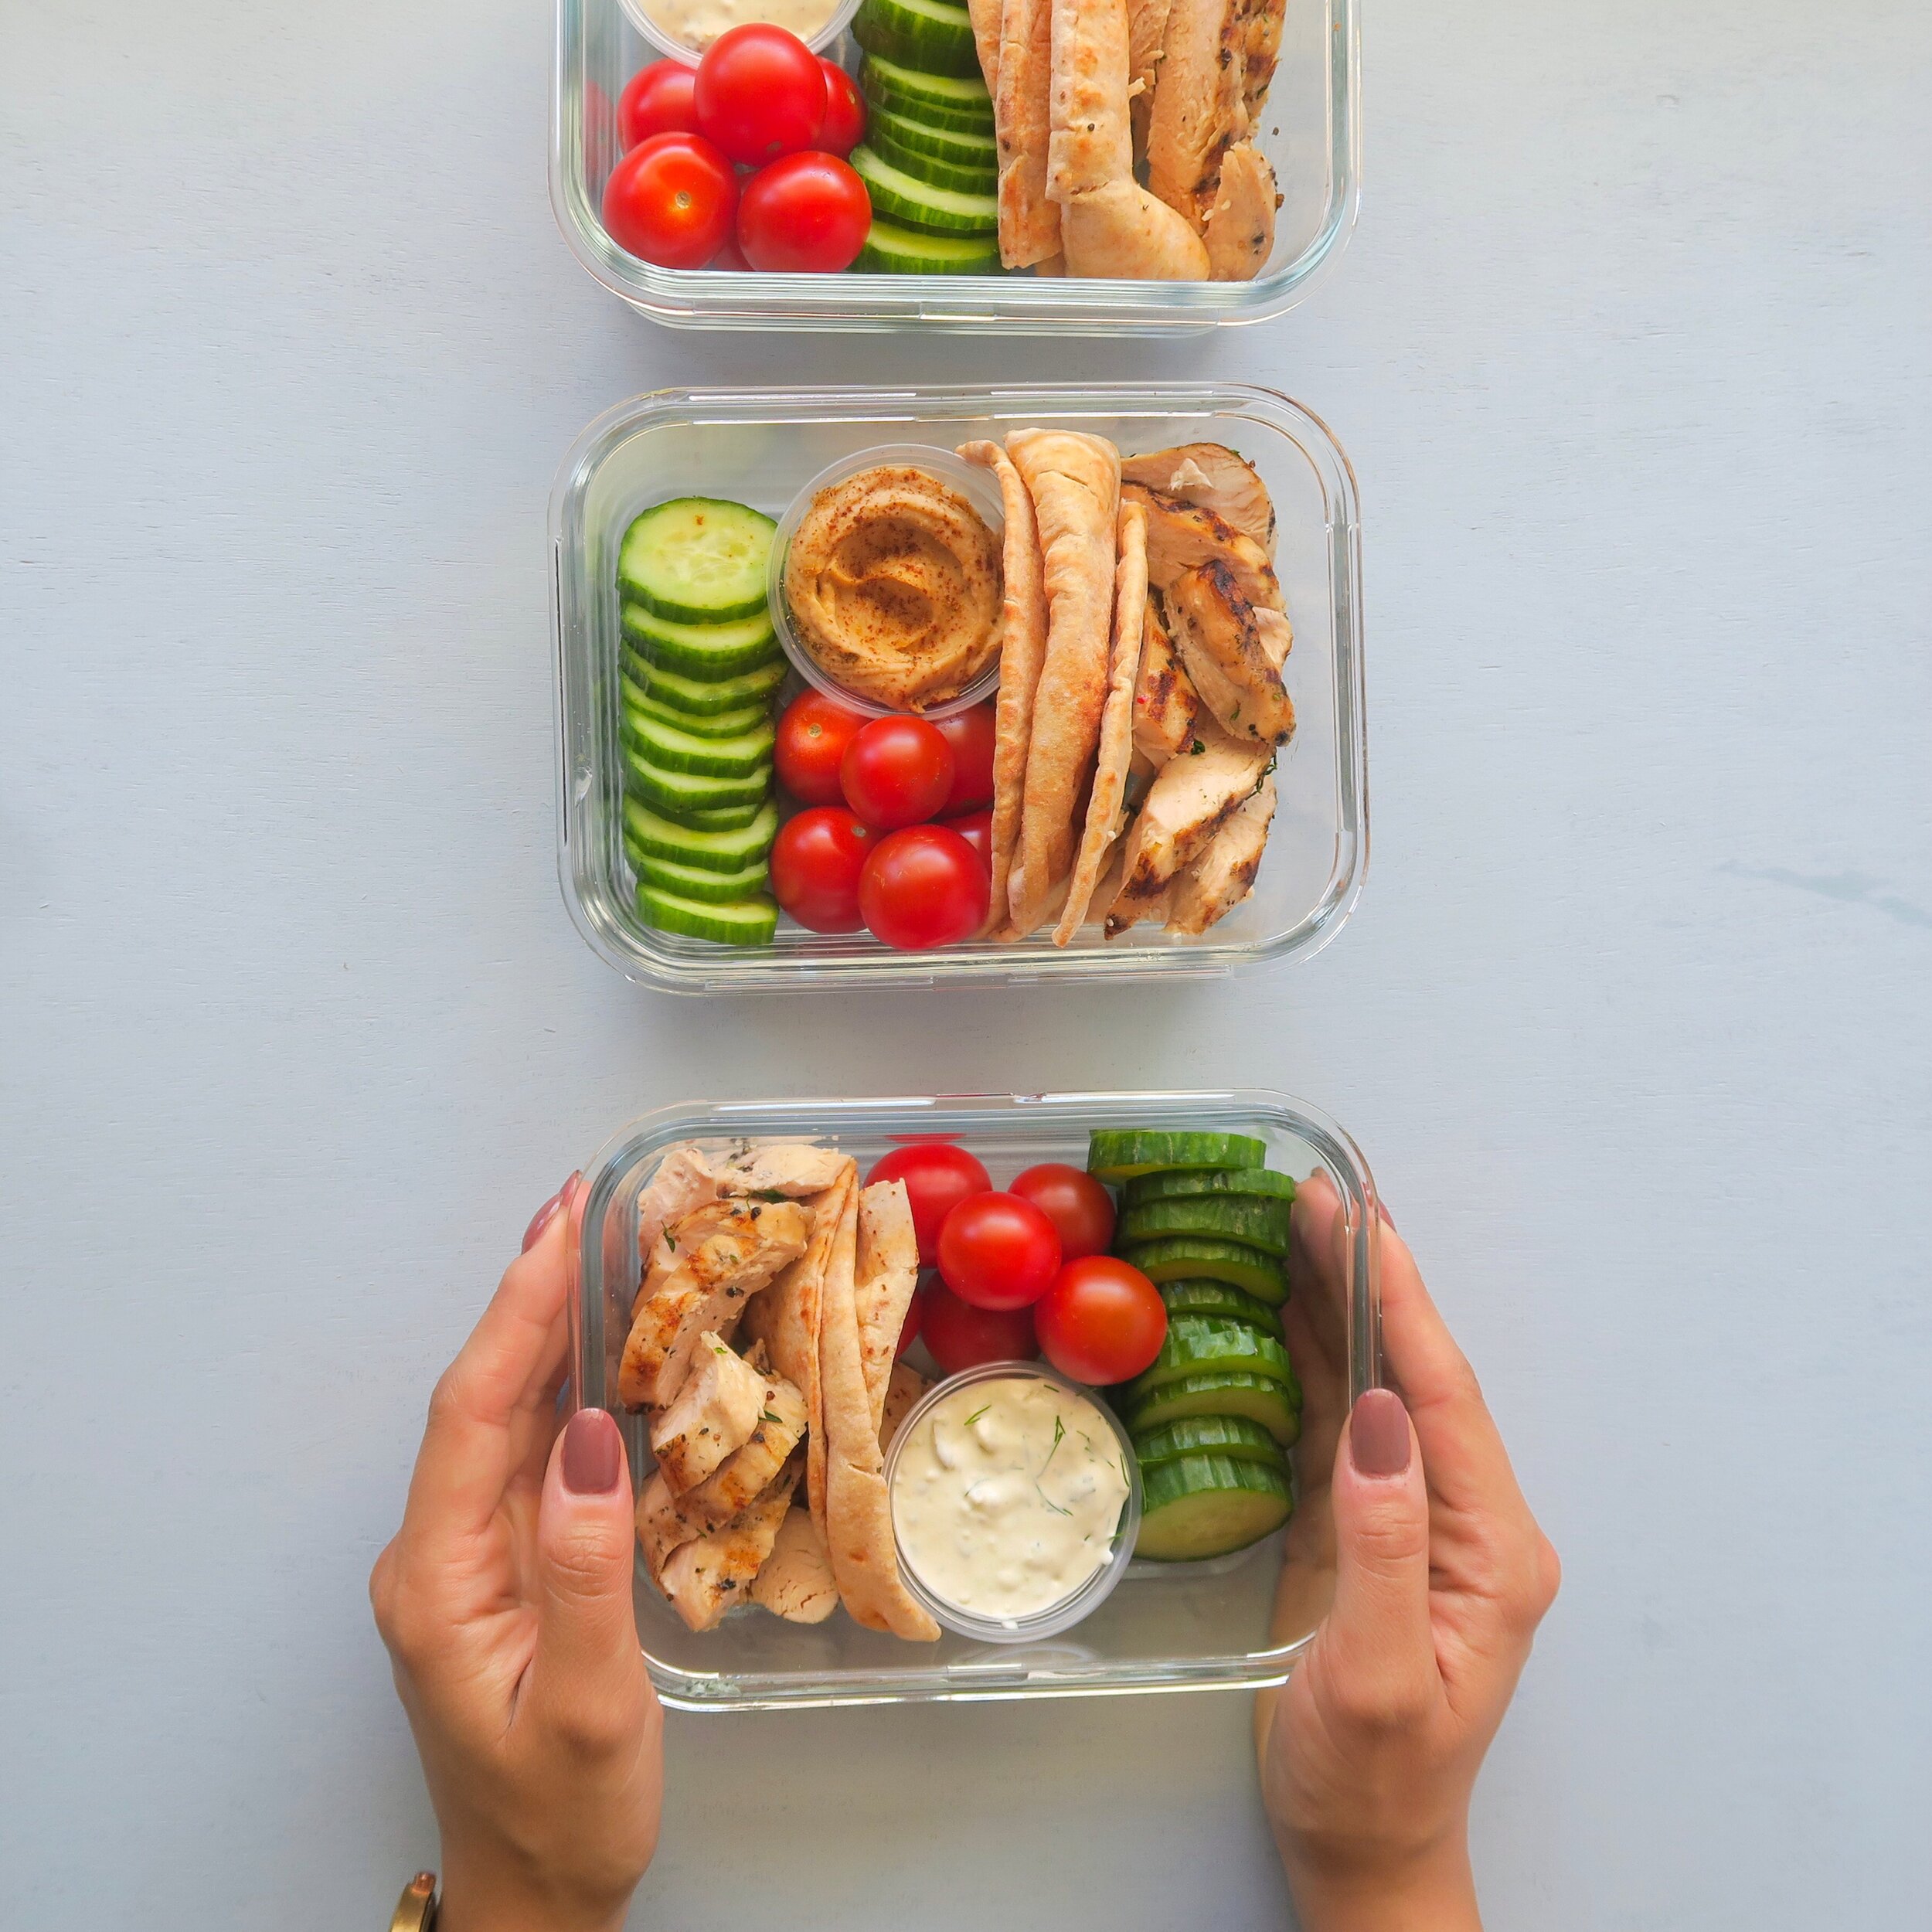 Getting Started with Meal Prep